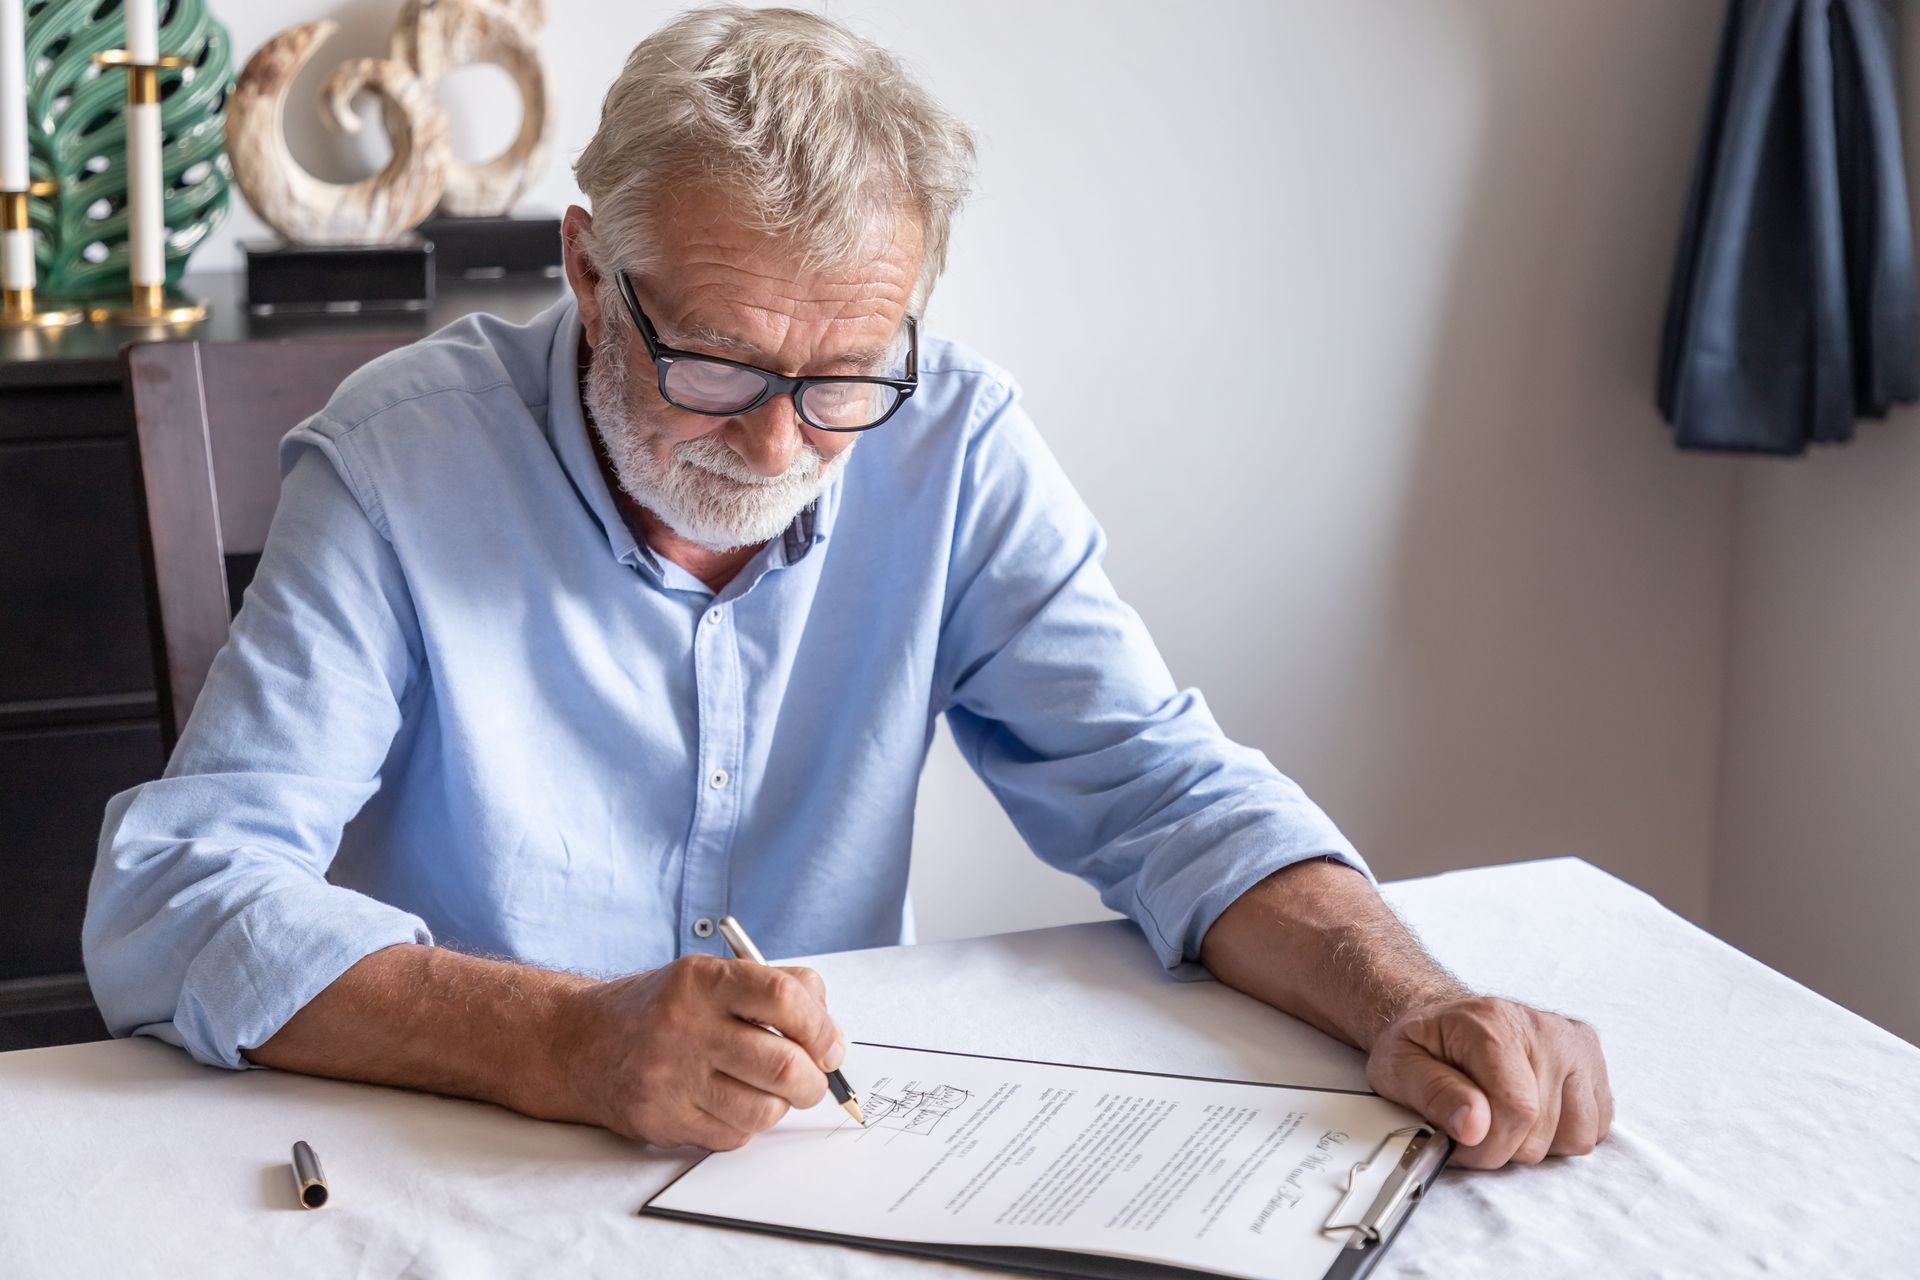 How Long Does it Take to Get a Grant of Probate?